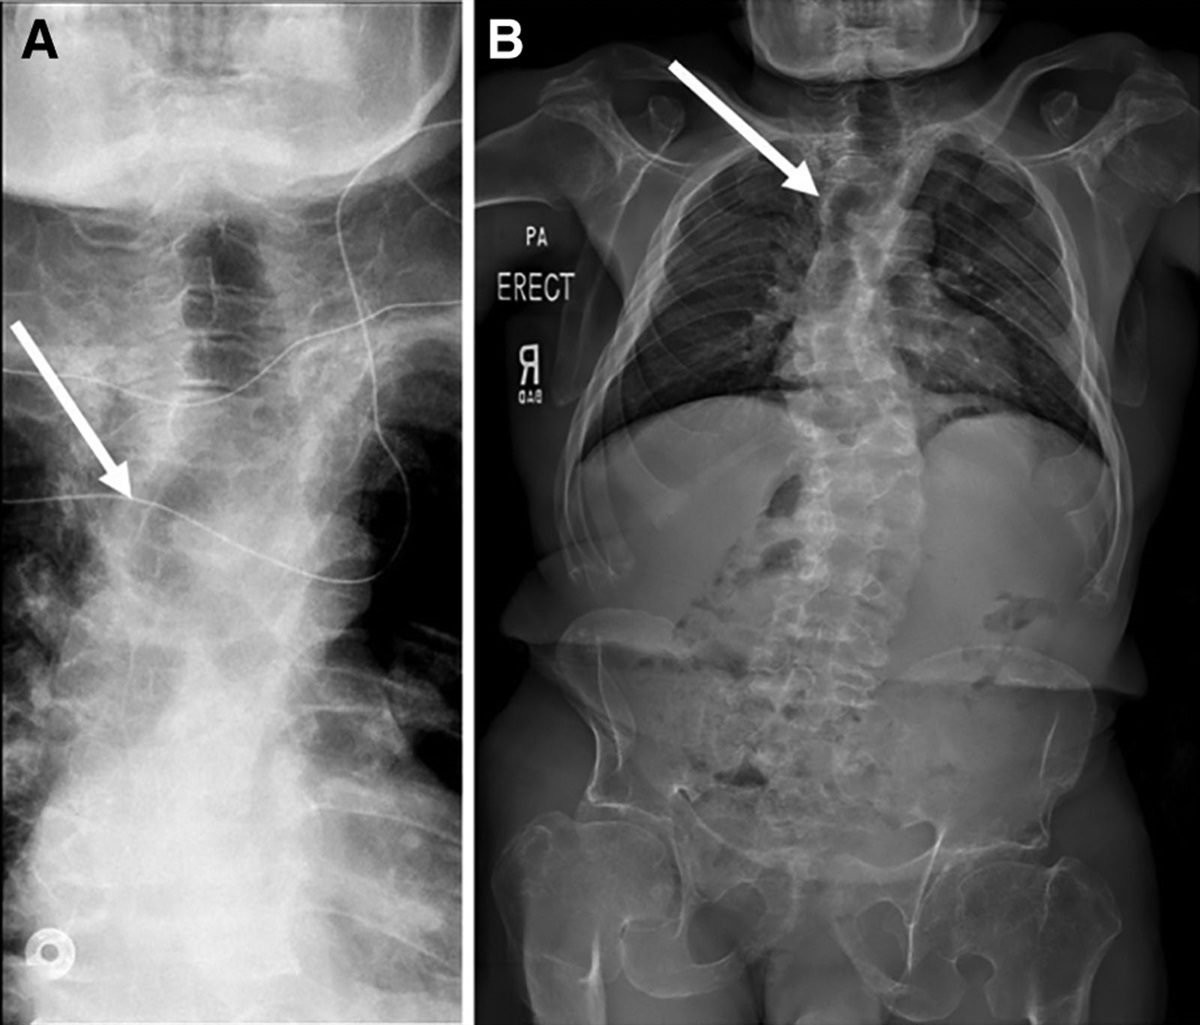 Severe Multilevel Tracheal Stenosis with Significant Twisting in a Patient with Spondylometaphyseal Dysplasia: A Case Report